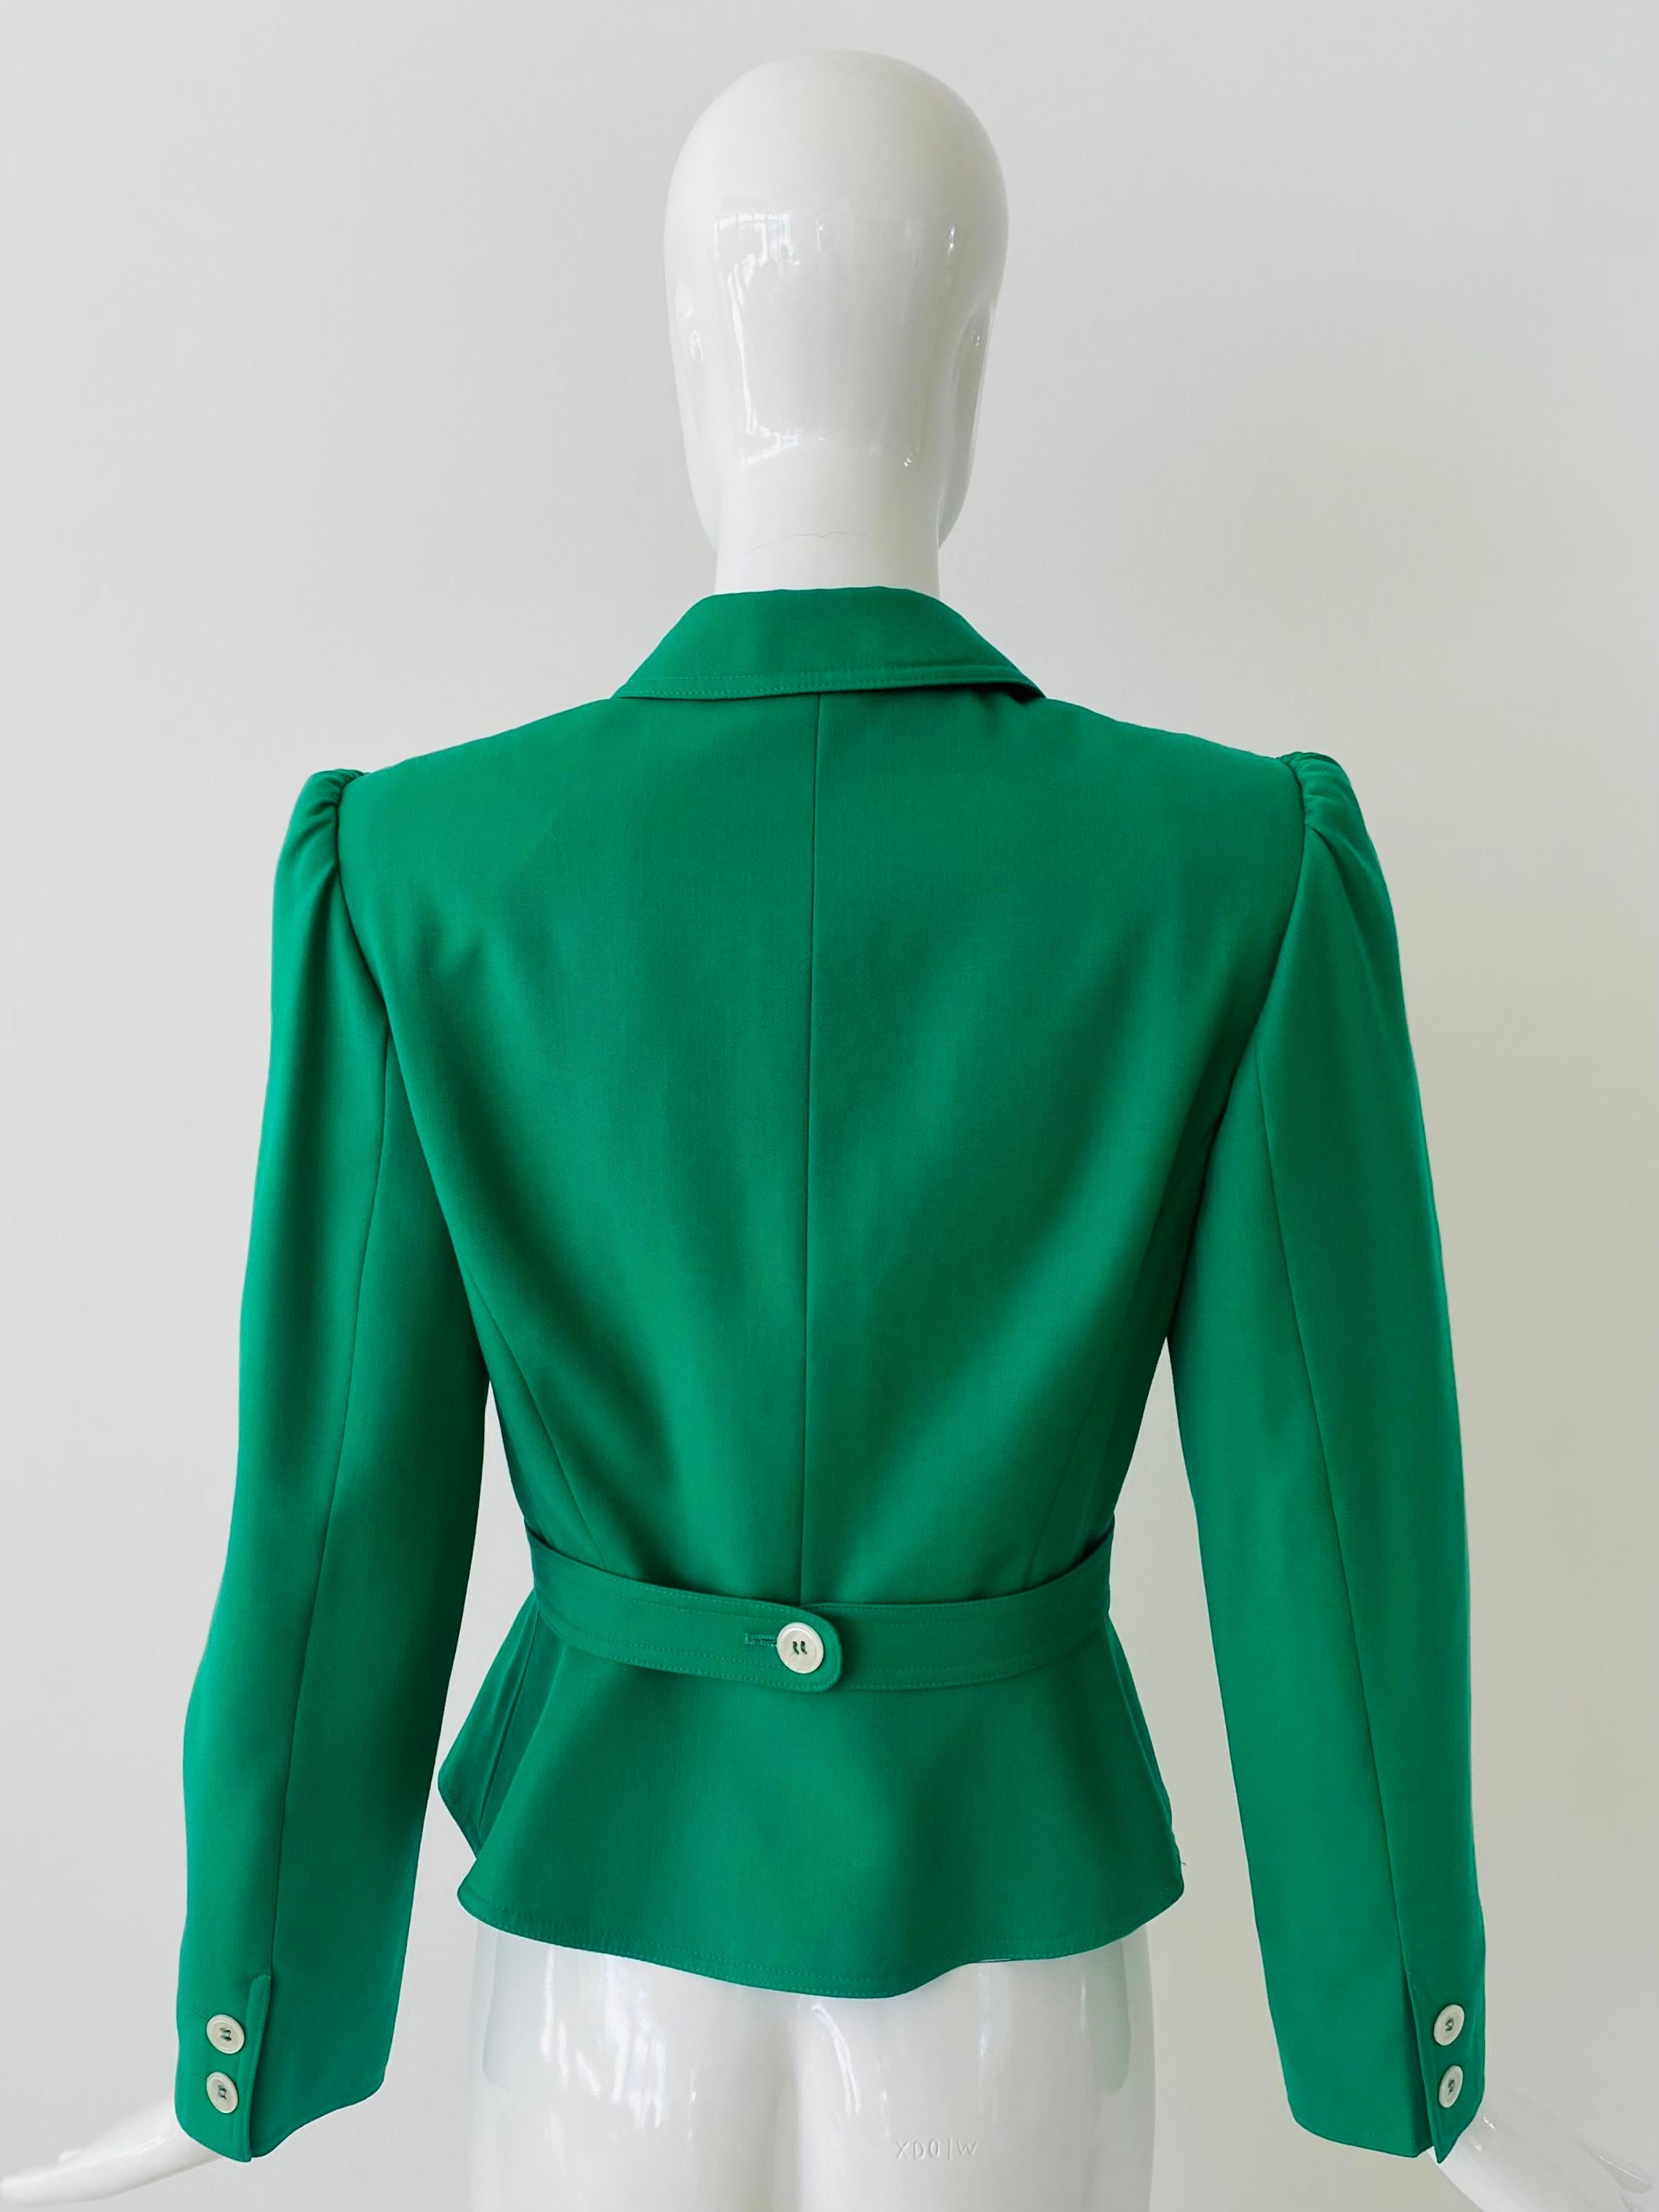 1990s Valentino jacket in Kelly green with white buttons. It has beautiful structured puff shoulders and a peplum ruffle hem.  There is a single button strap at the back to pull in the waist and could be used to modify the fit of the jacket as